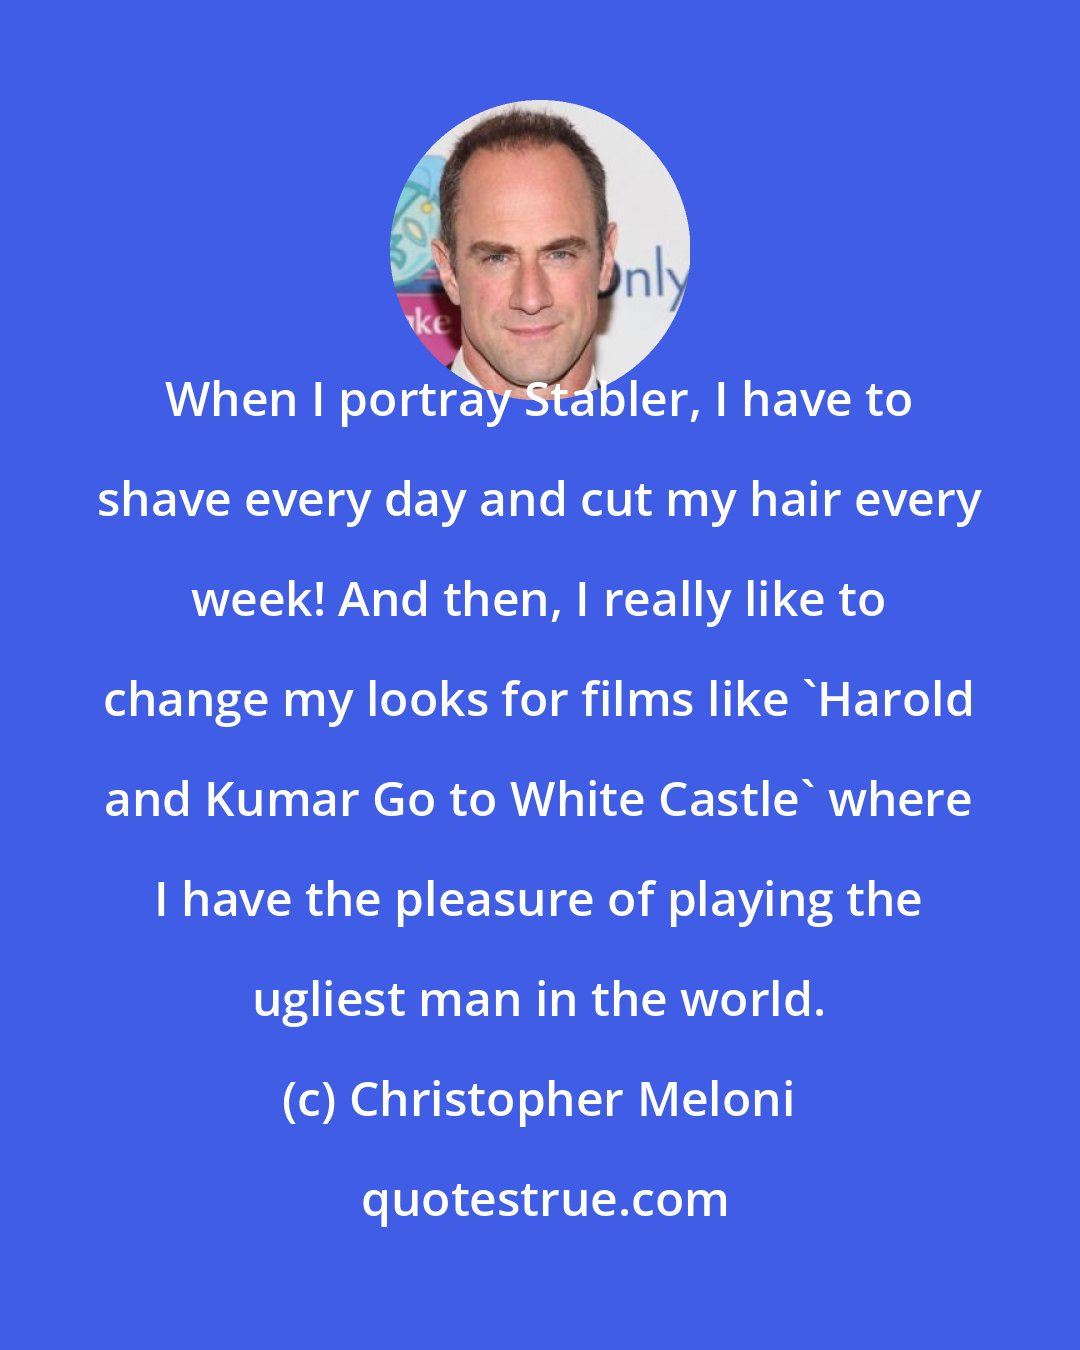 Christopher Meloni: When I portray Stabler, I have to shave every day and cut my hair every week! And then, I really like to change my looks for films like 'Harold and Kumar Go to White Castle' where I have the pleasure of playing the ugliest man in the world.